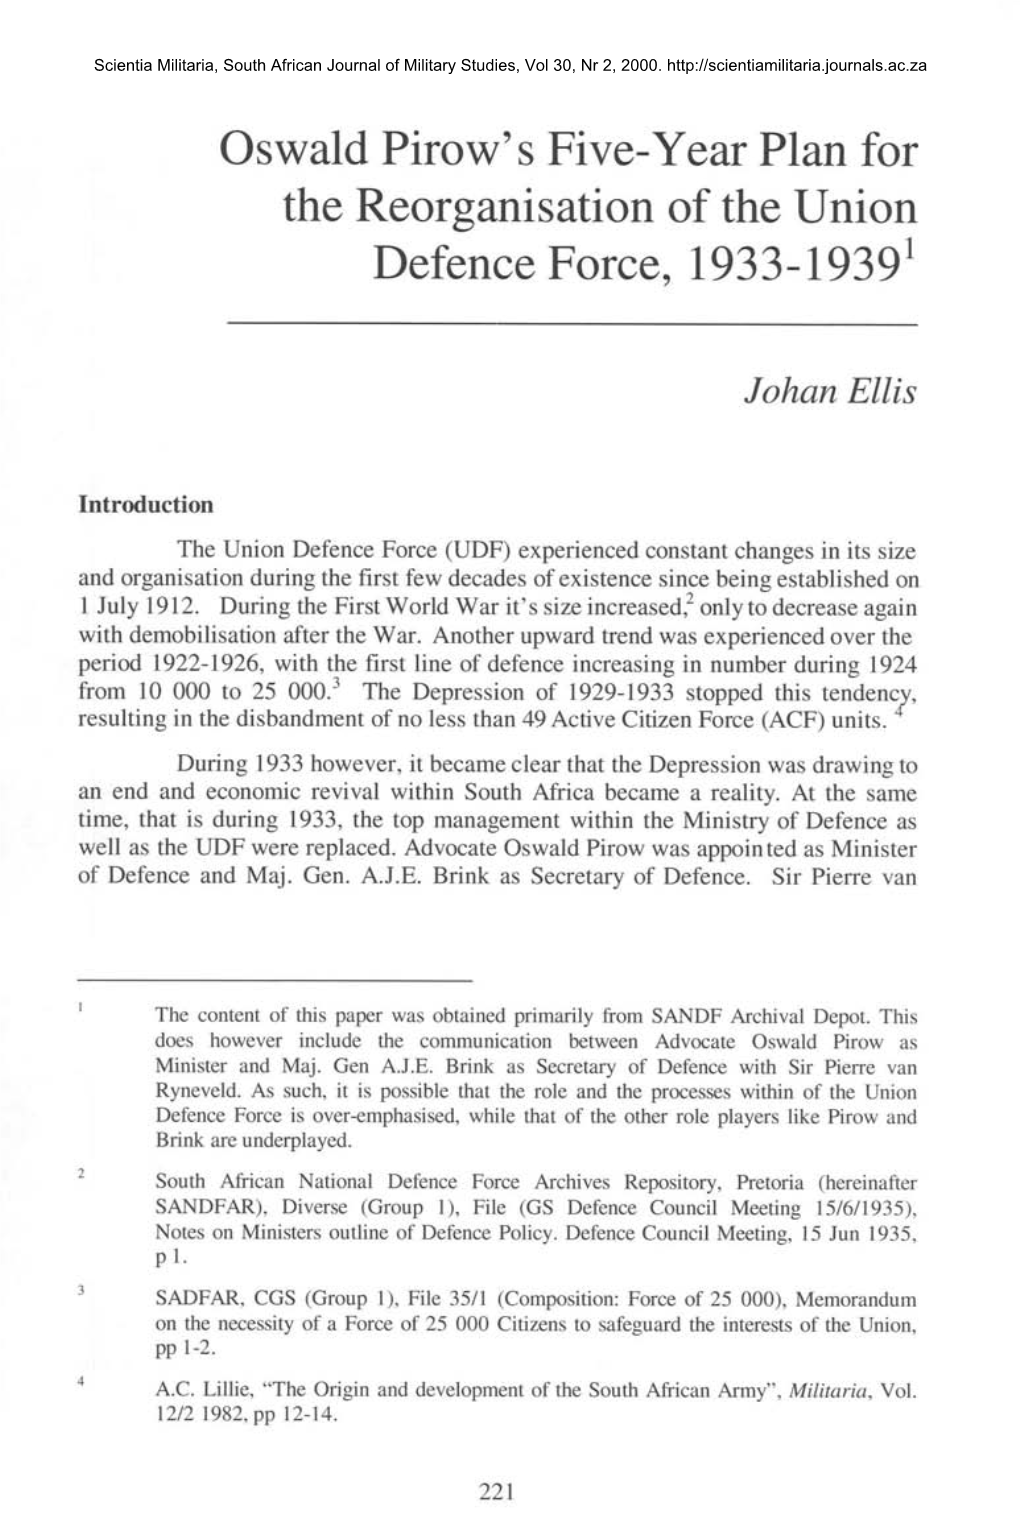 Oswald Pirow's Five- Year Plan for the Reorganisation of the Union Defence Force, 1933-19391